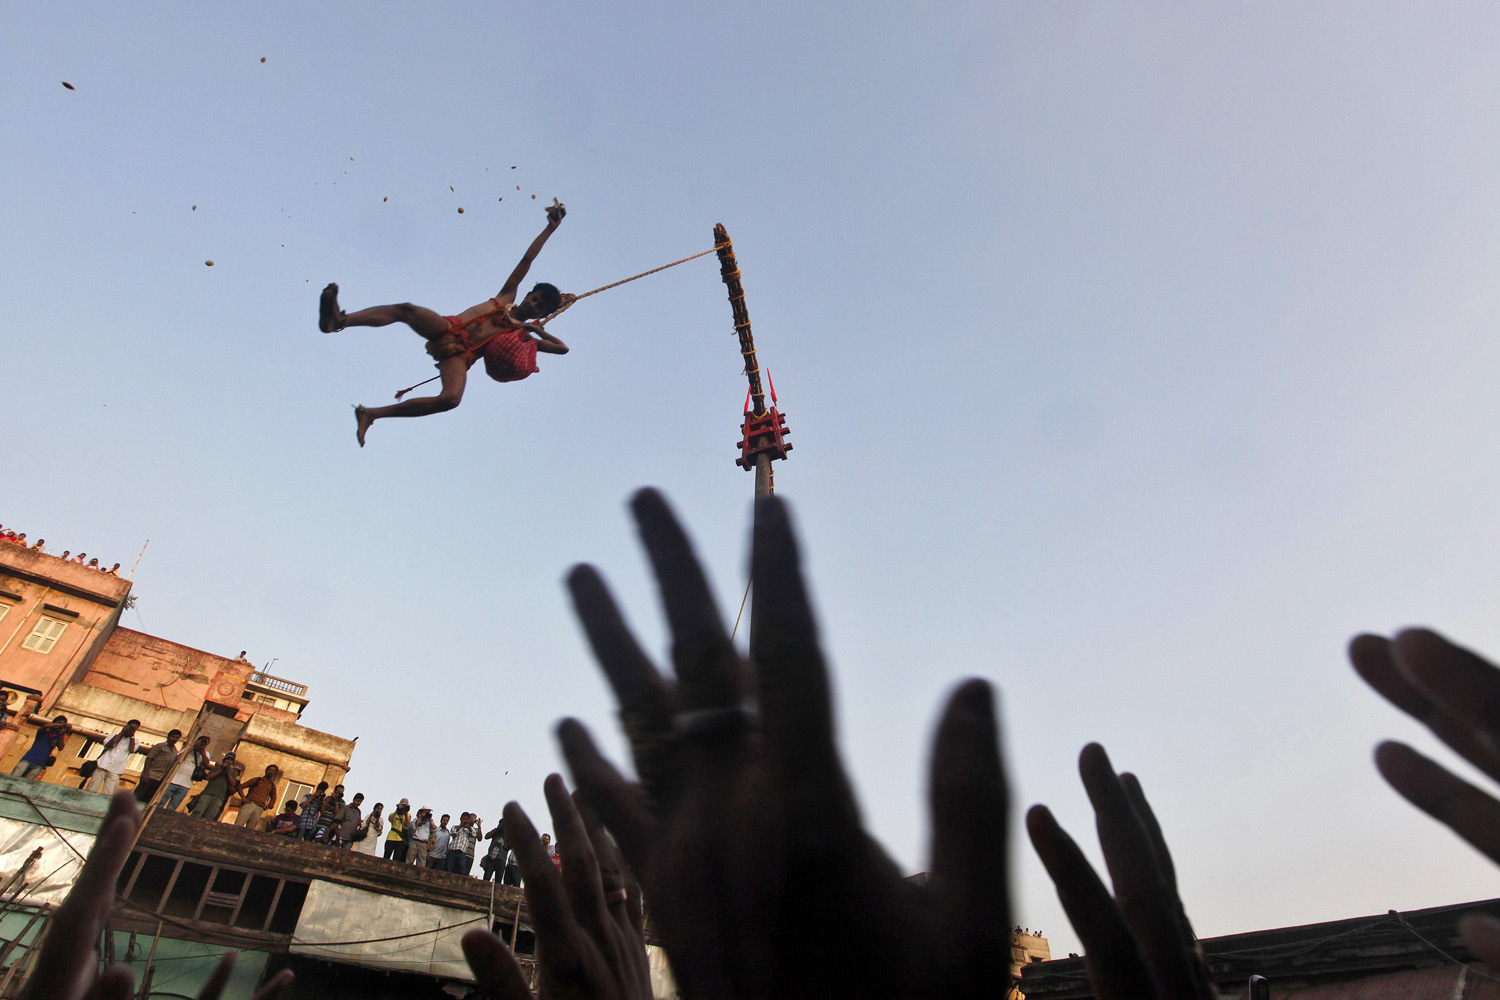 April 14, 2013. A Hindu devotee hanging from a rope throws offering towards other devotees during the  Chadak  ritual in Kolkata. Hundreds of Hindu devotees attend the ritual, held to worship the Hindu deity of destruction Lord Shiva, on the last day of the Bengali calendar year.